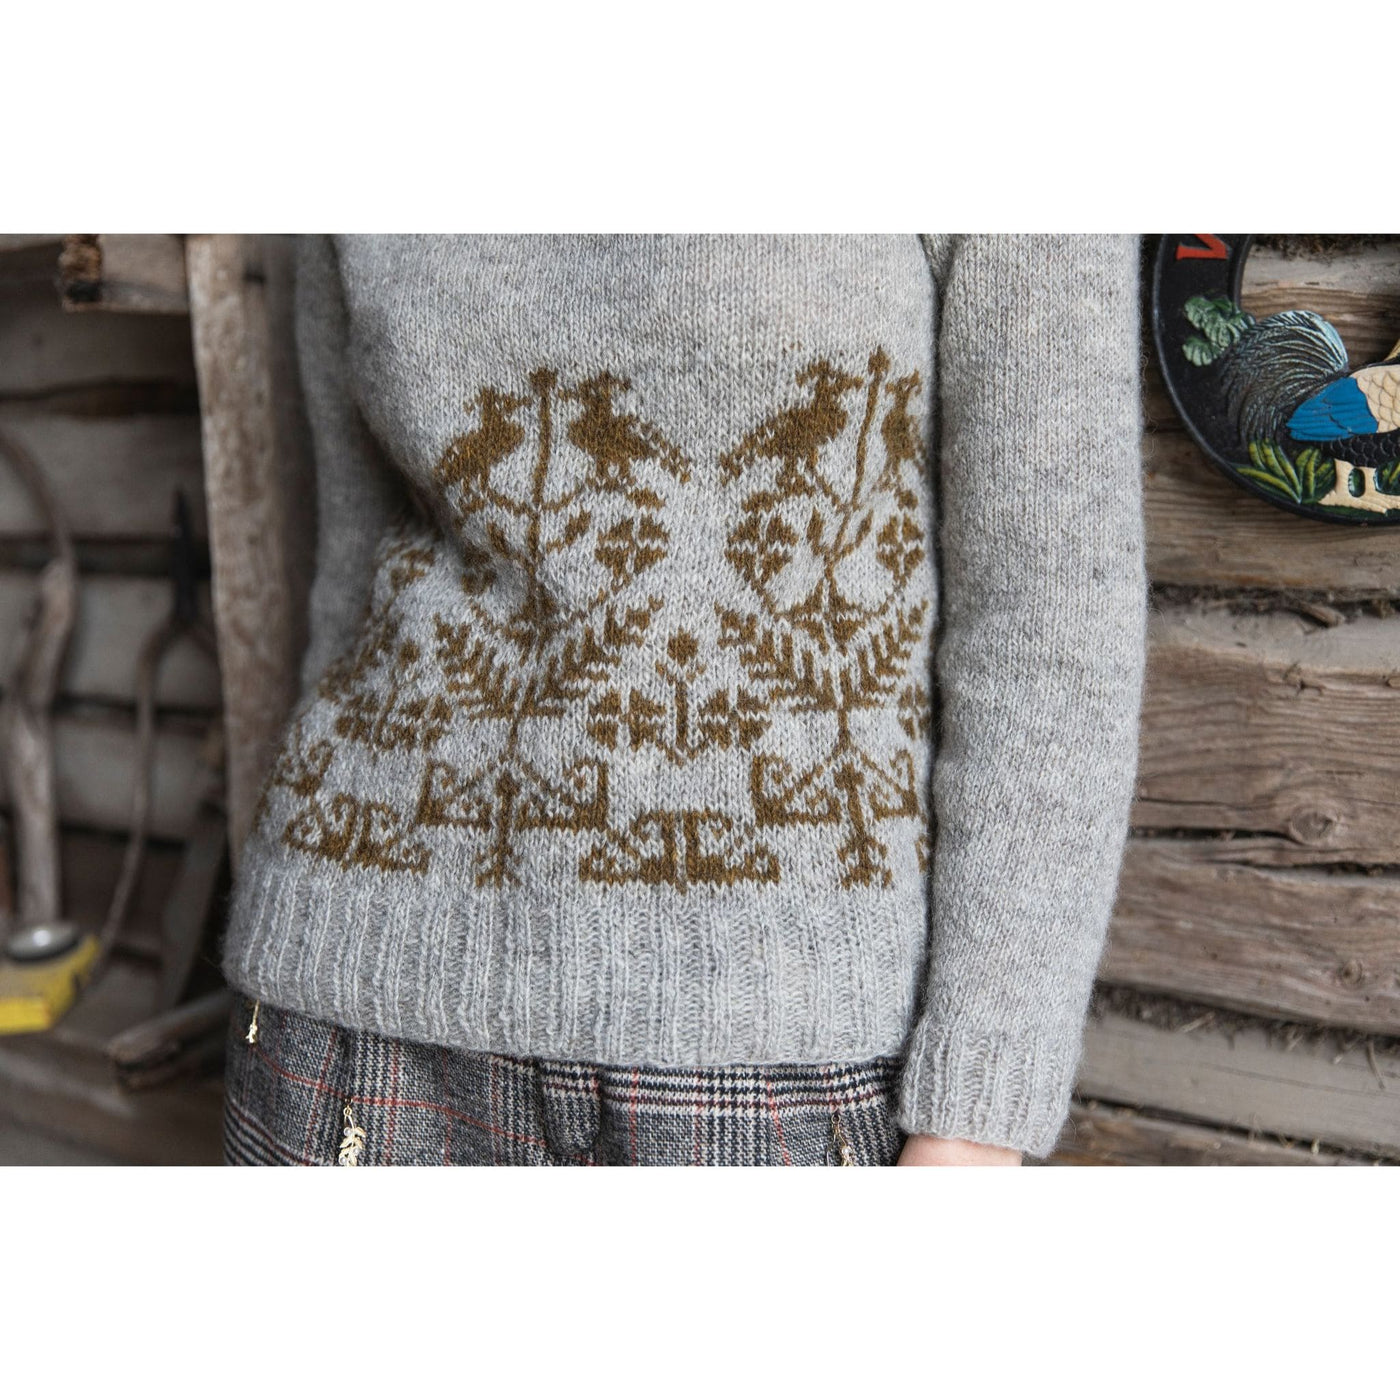 Knitted Kalevala book by Jenna Kostet from Laine Publishing. A design from book is shown - body of sweater shown on model with grey and gold colorwork.